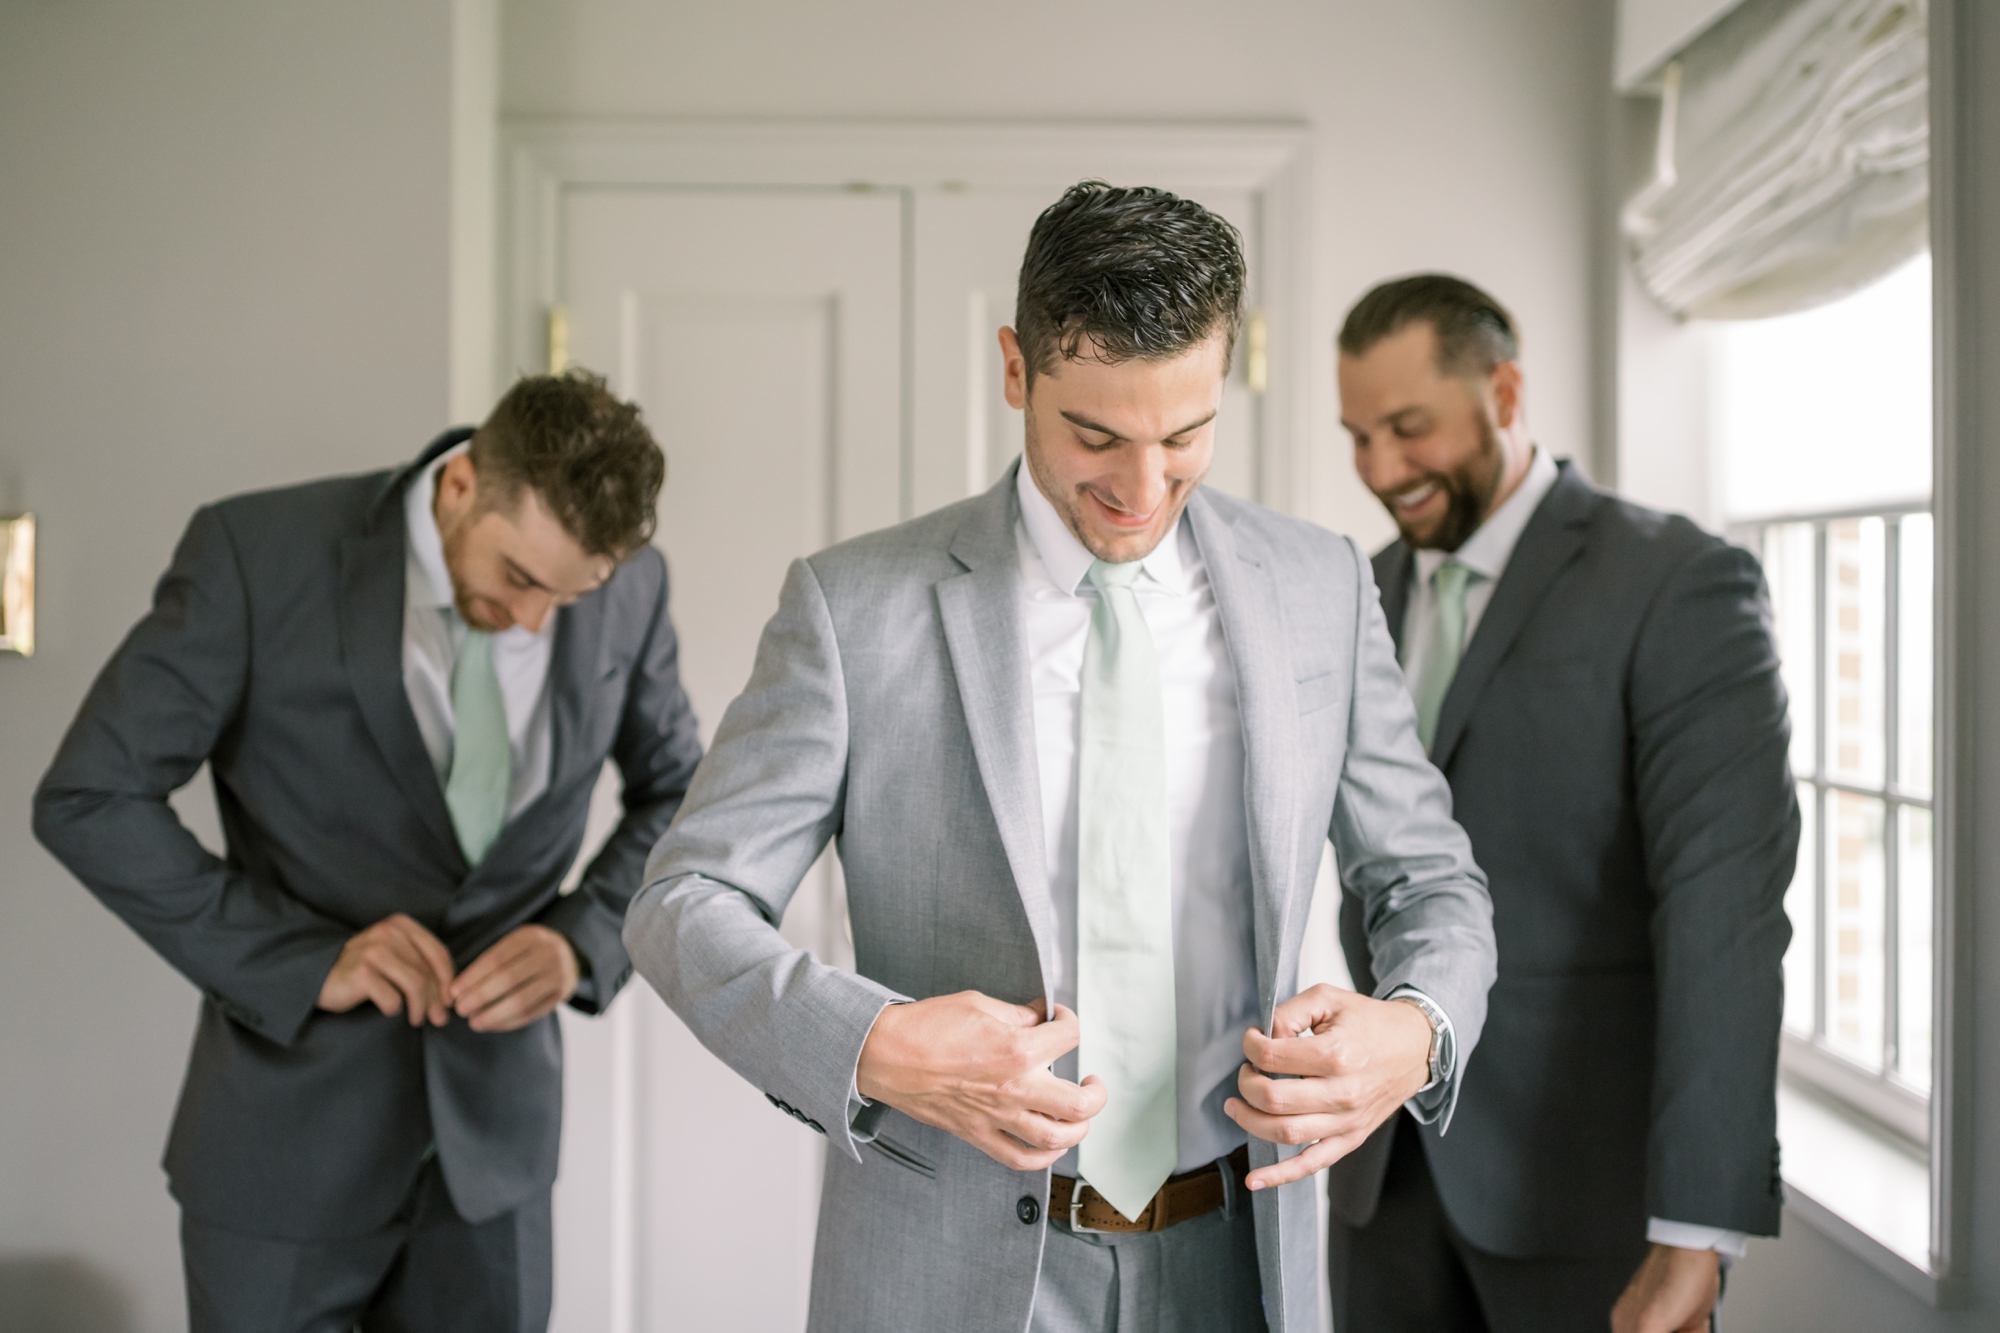 A groom puts on his wedding day suit with the help of his groomsmen.